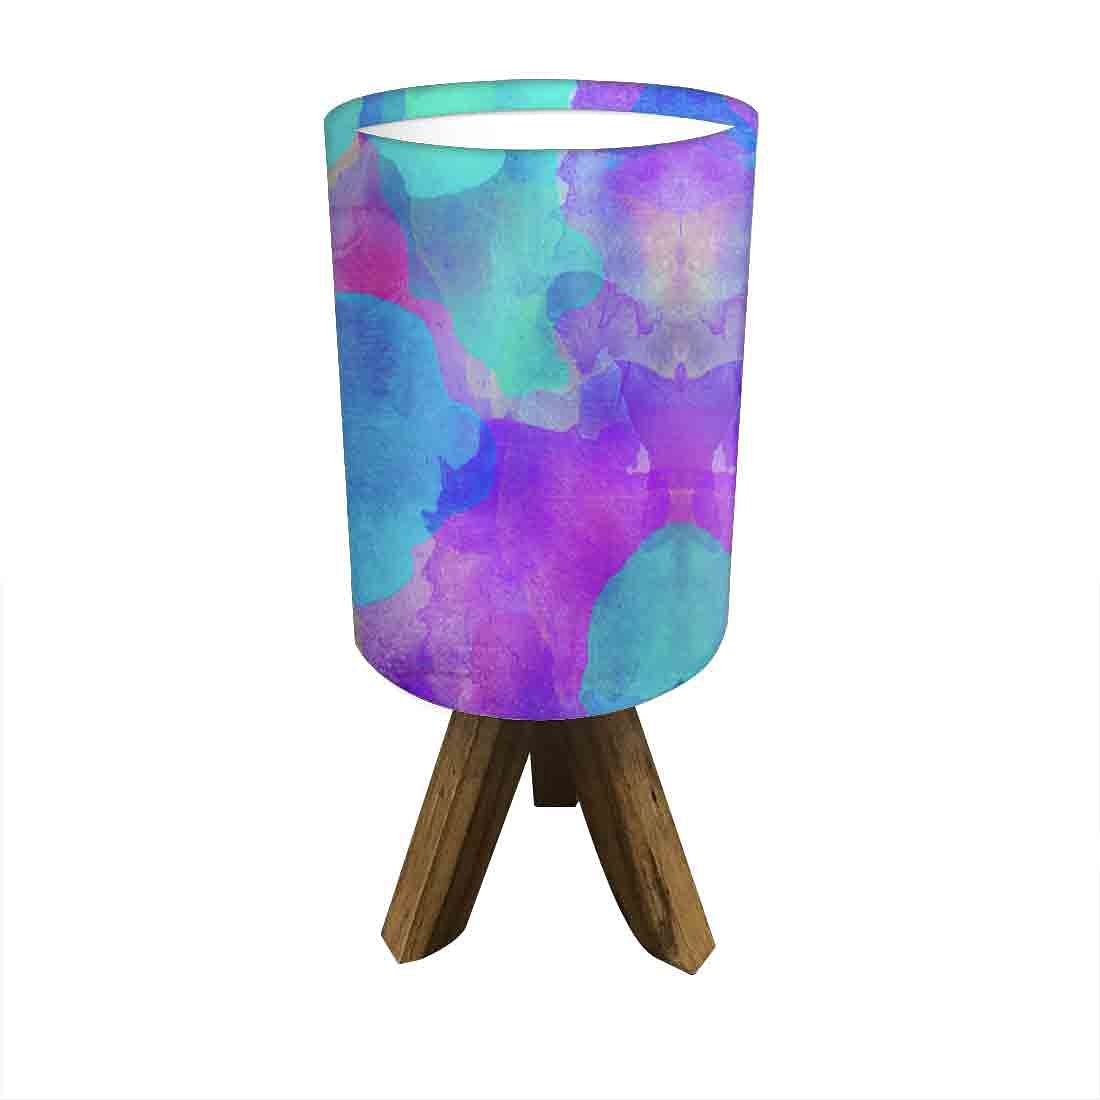 Wooden Dining Light For Bedroom - Watercolor Nutcase